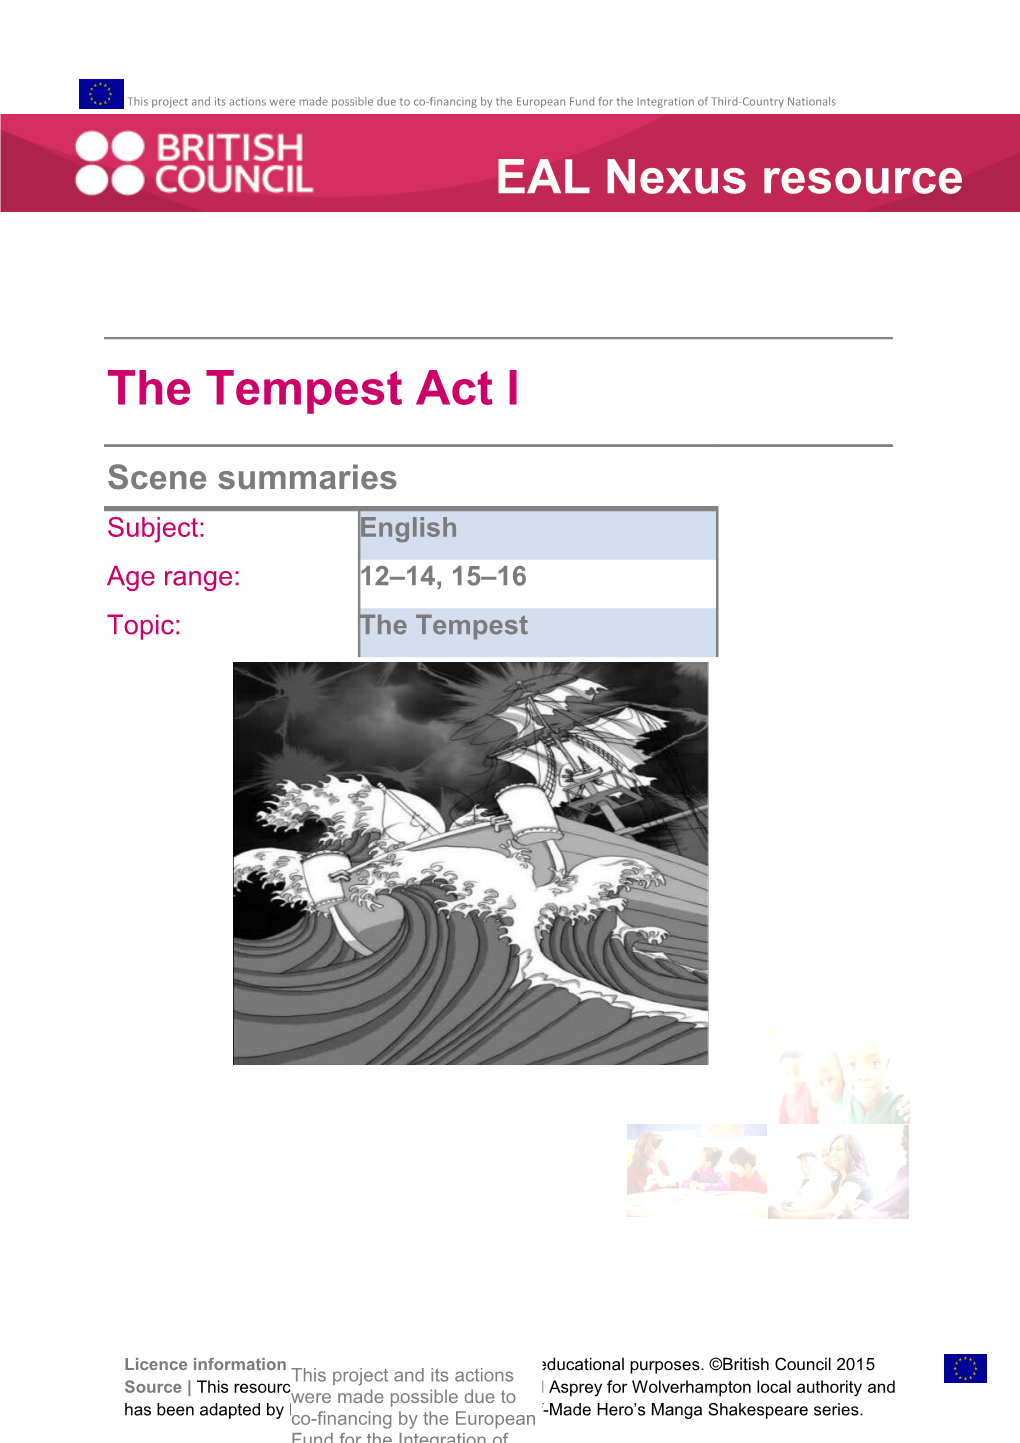 The Tempest Act 1